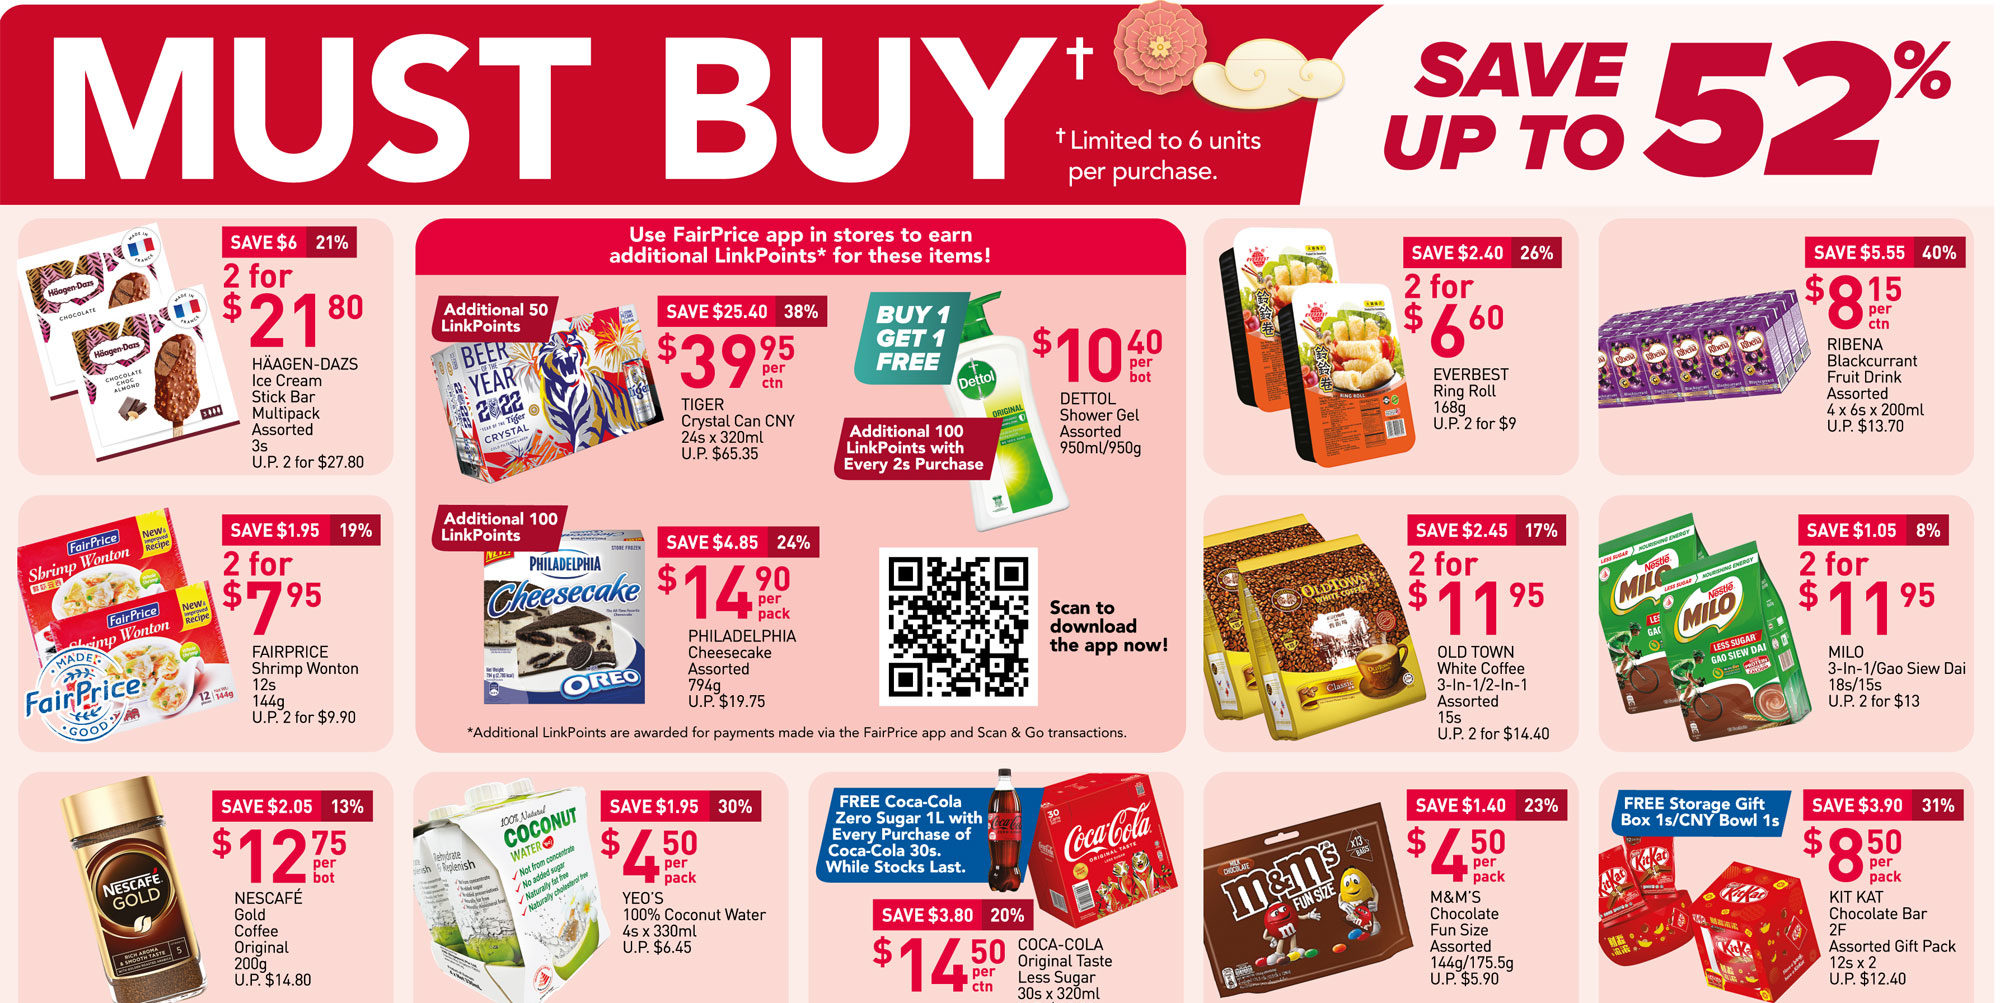 NTUC FairPrice Singapore Your Weekly Saver Promotions 13-19 Jan 2022